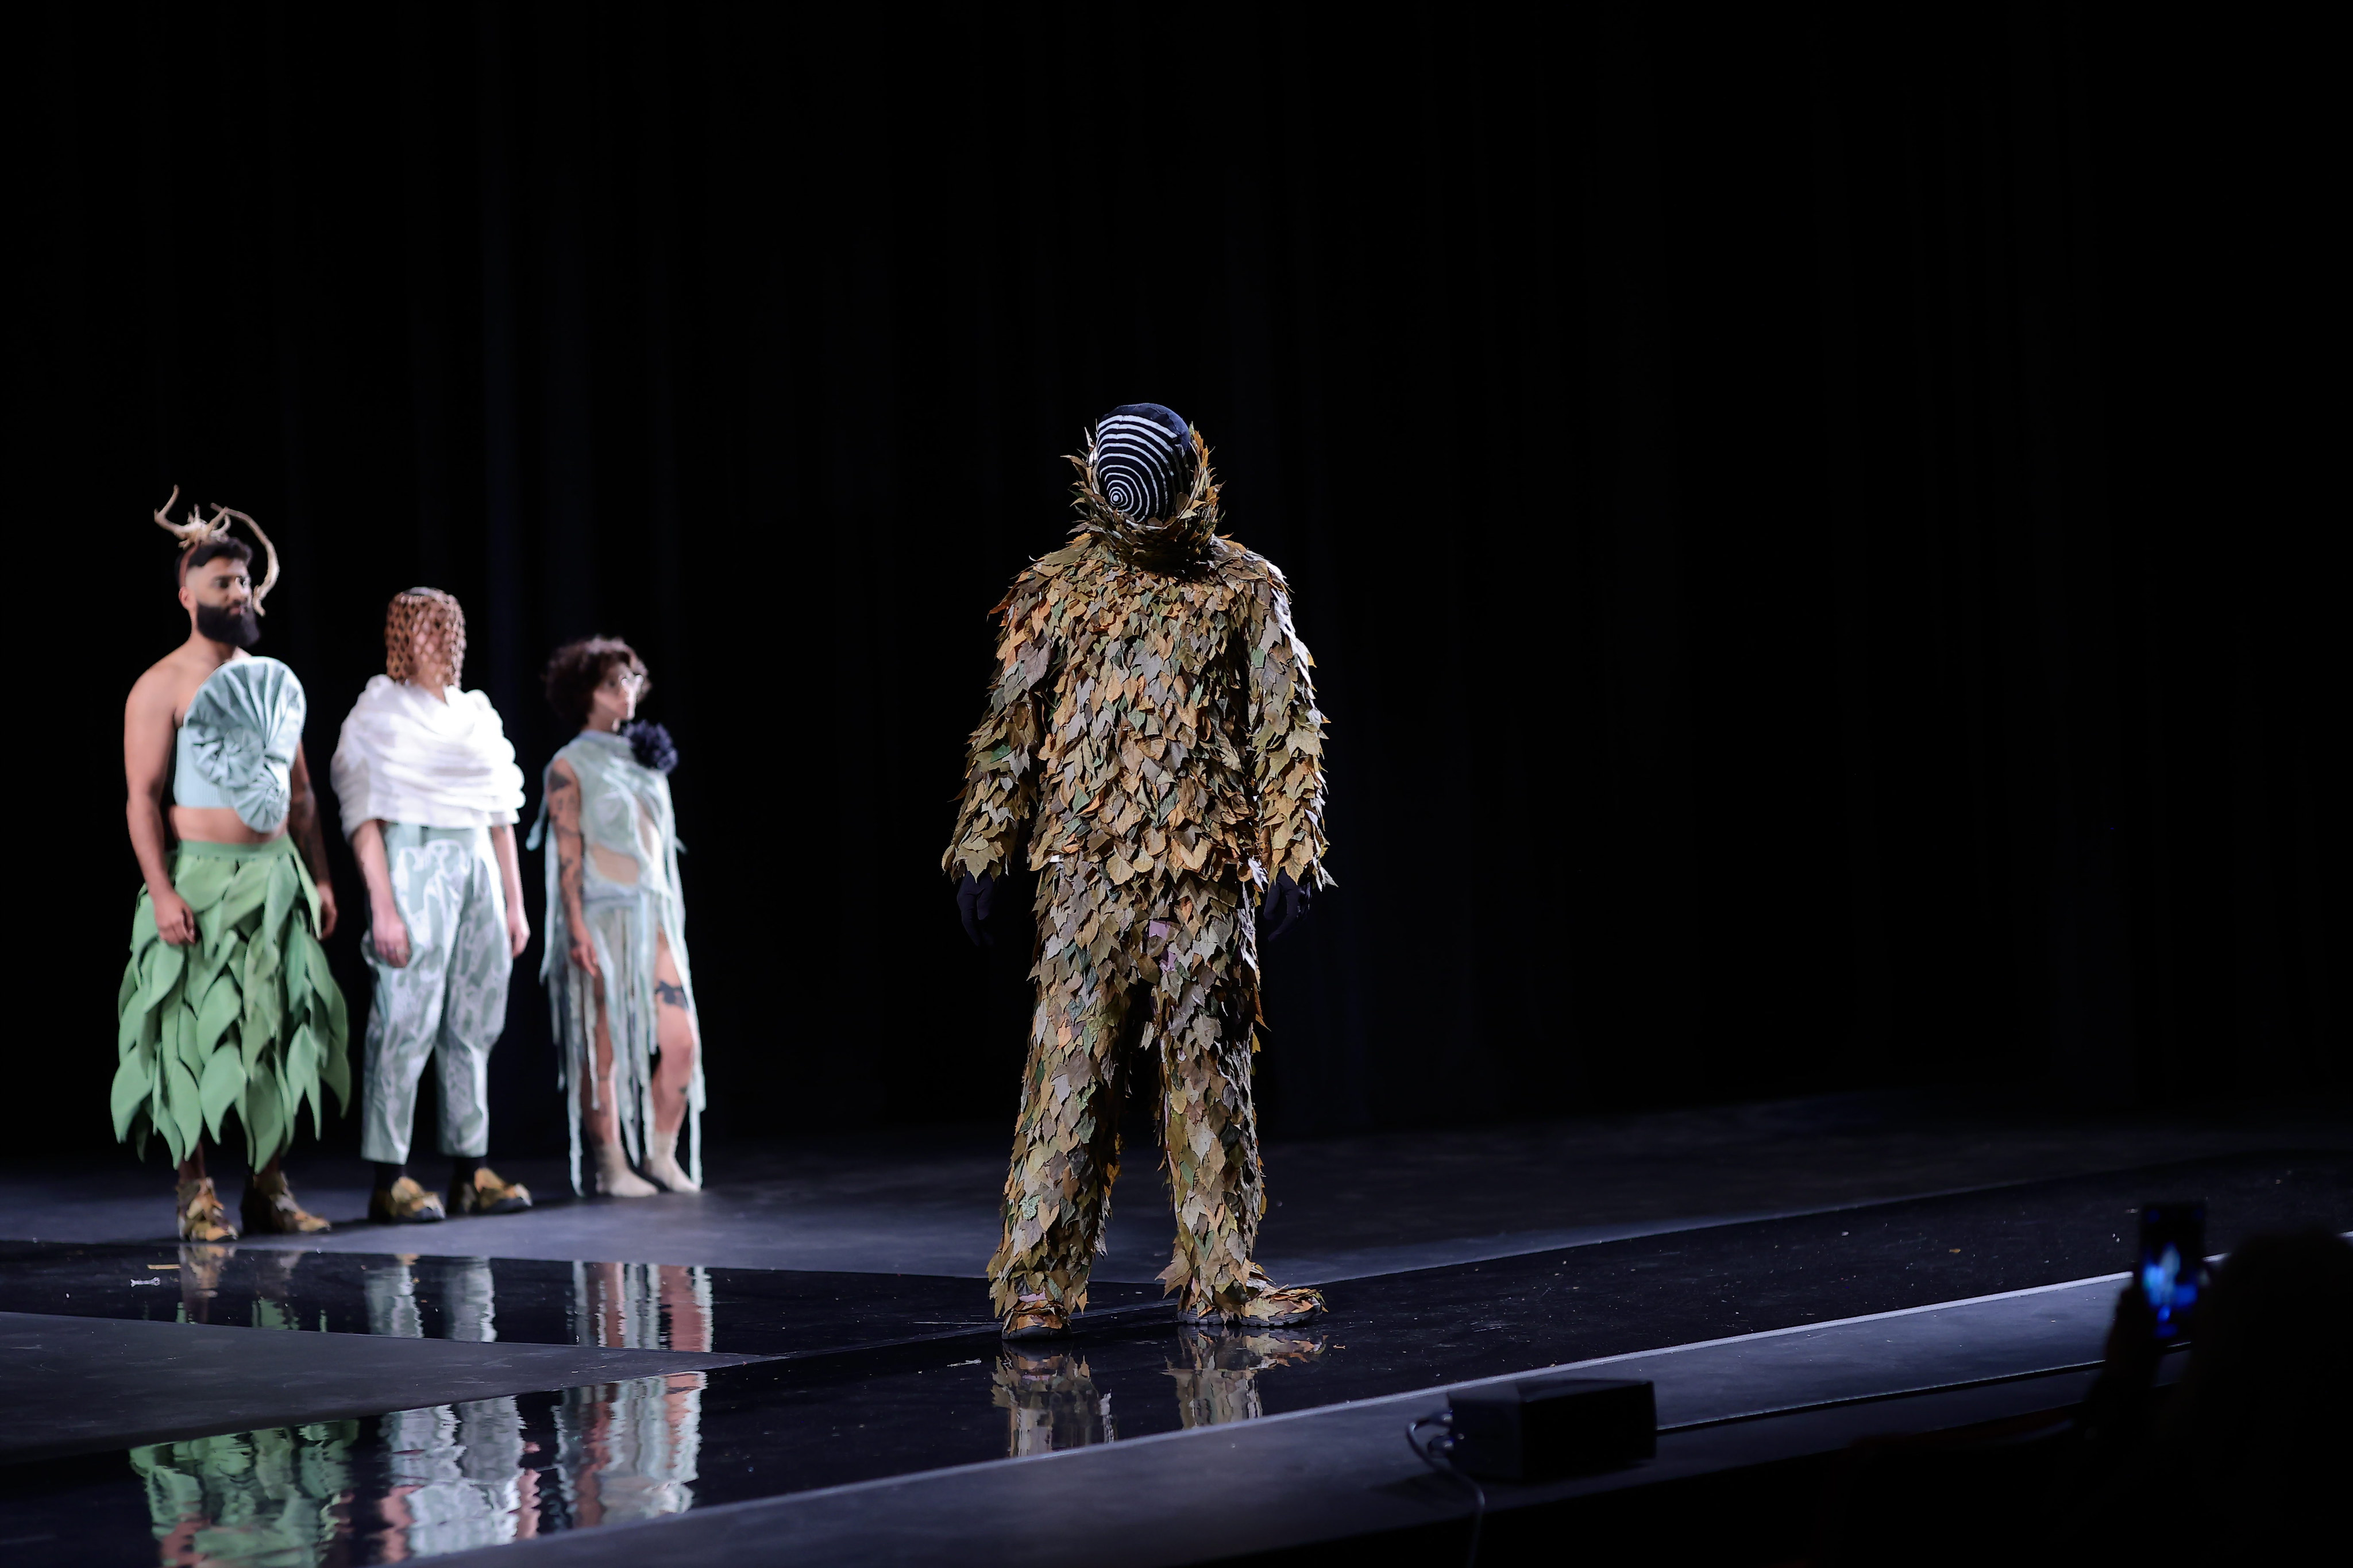 Model is wearing a leafy suit covering nearly head to toe. Models head is covered in a black mask with a white spiral on the front. Group of models pose in the background 